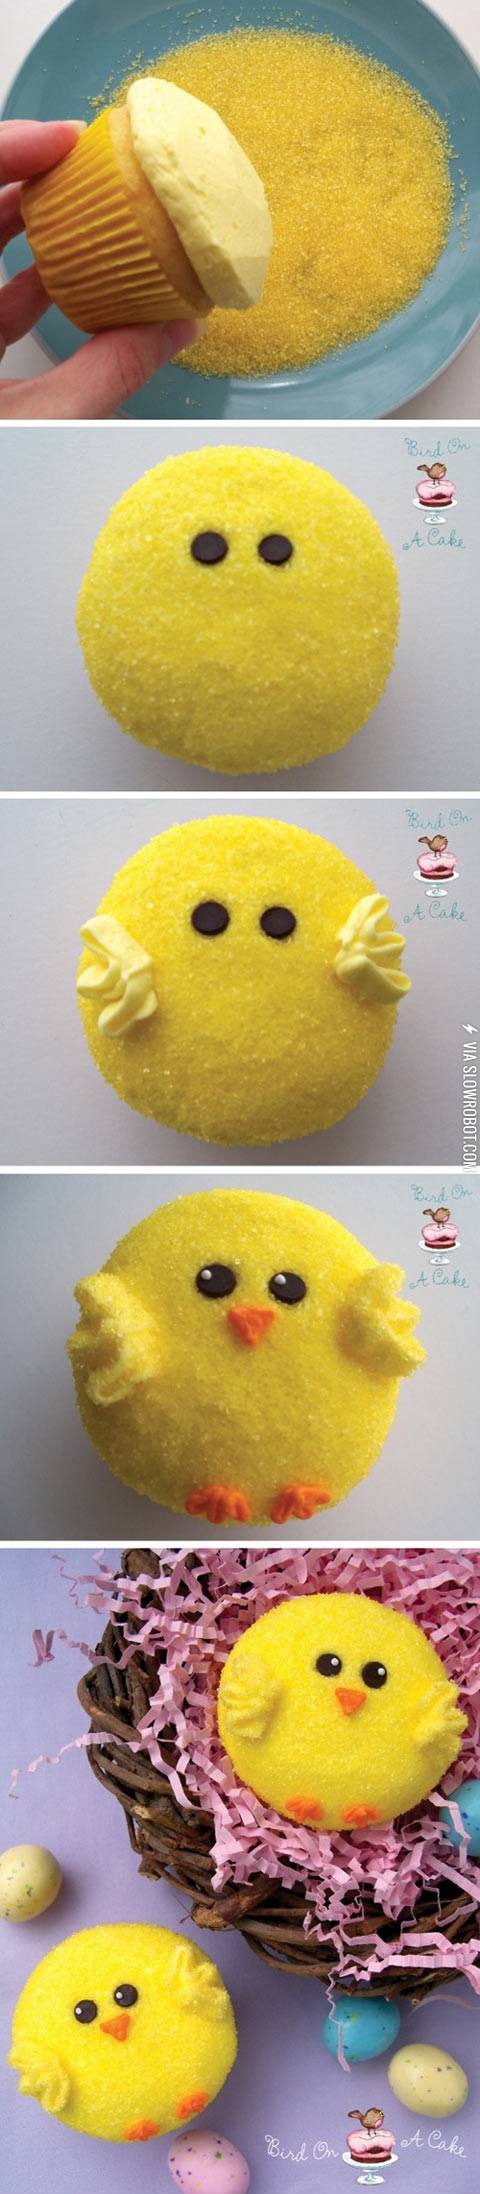 Easter+cupcakes.